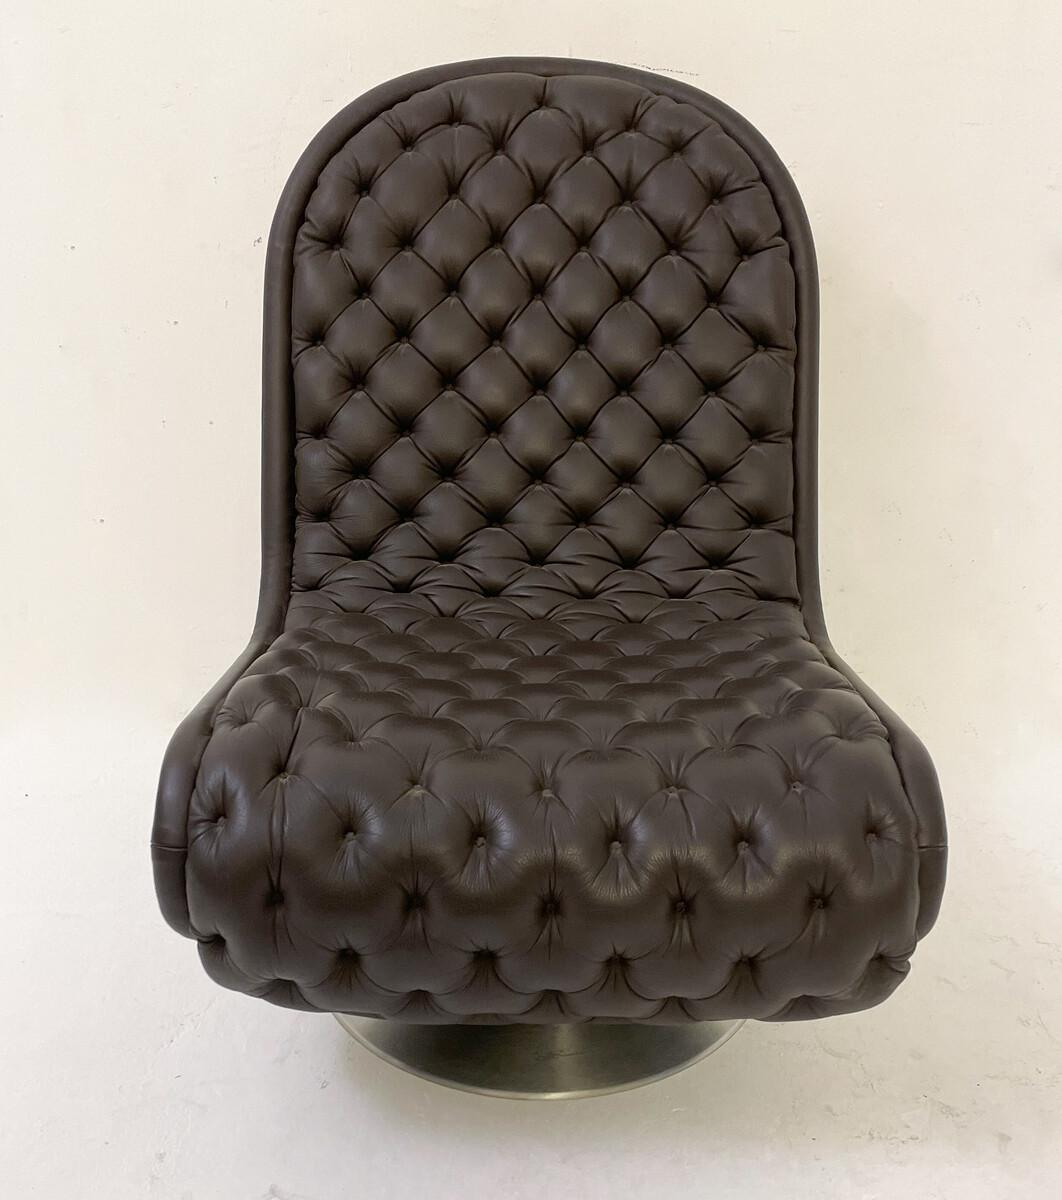 Danish Mid-Century Modern Brown Leather System 123 Chair by Verner Panton, Denmark For Sale